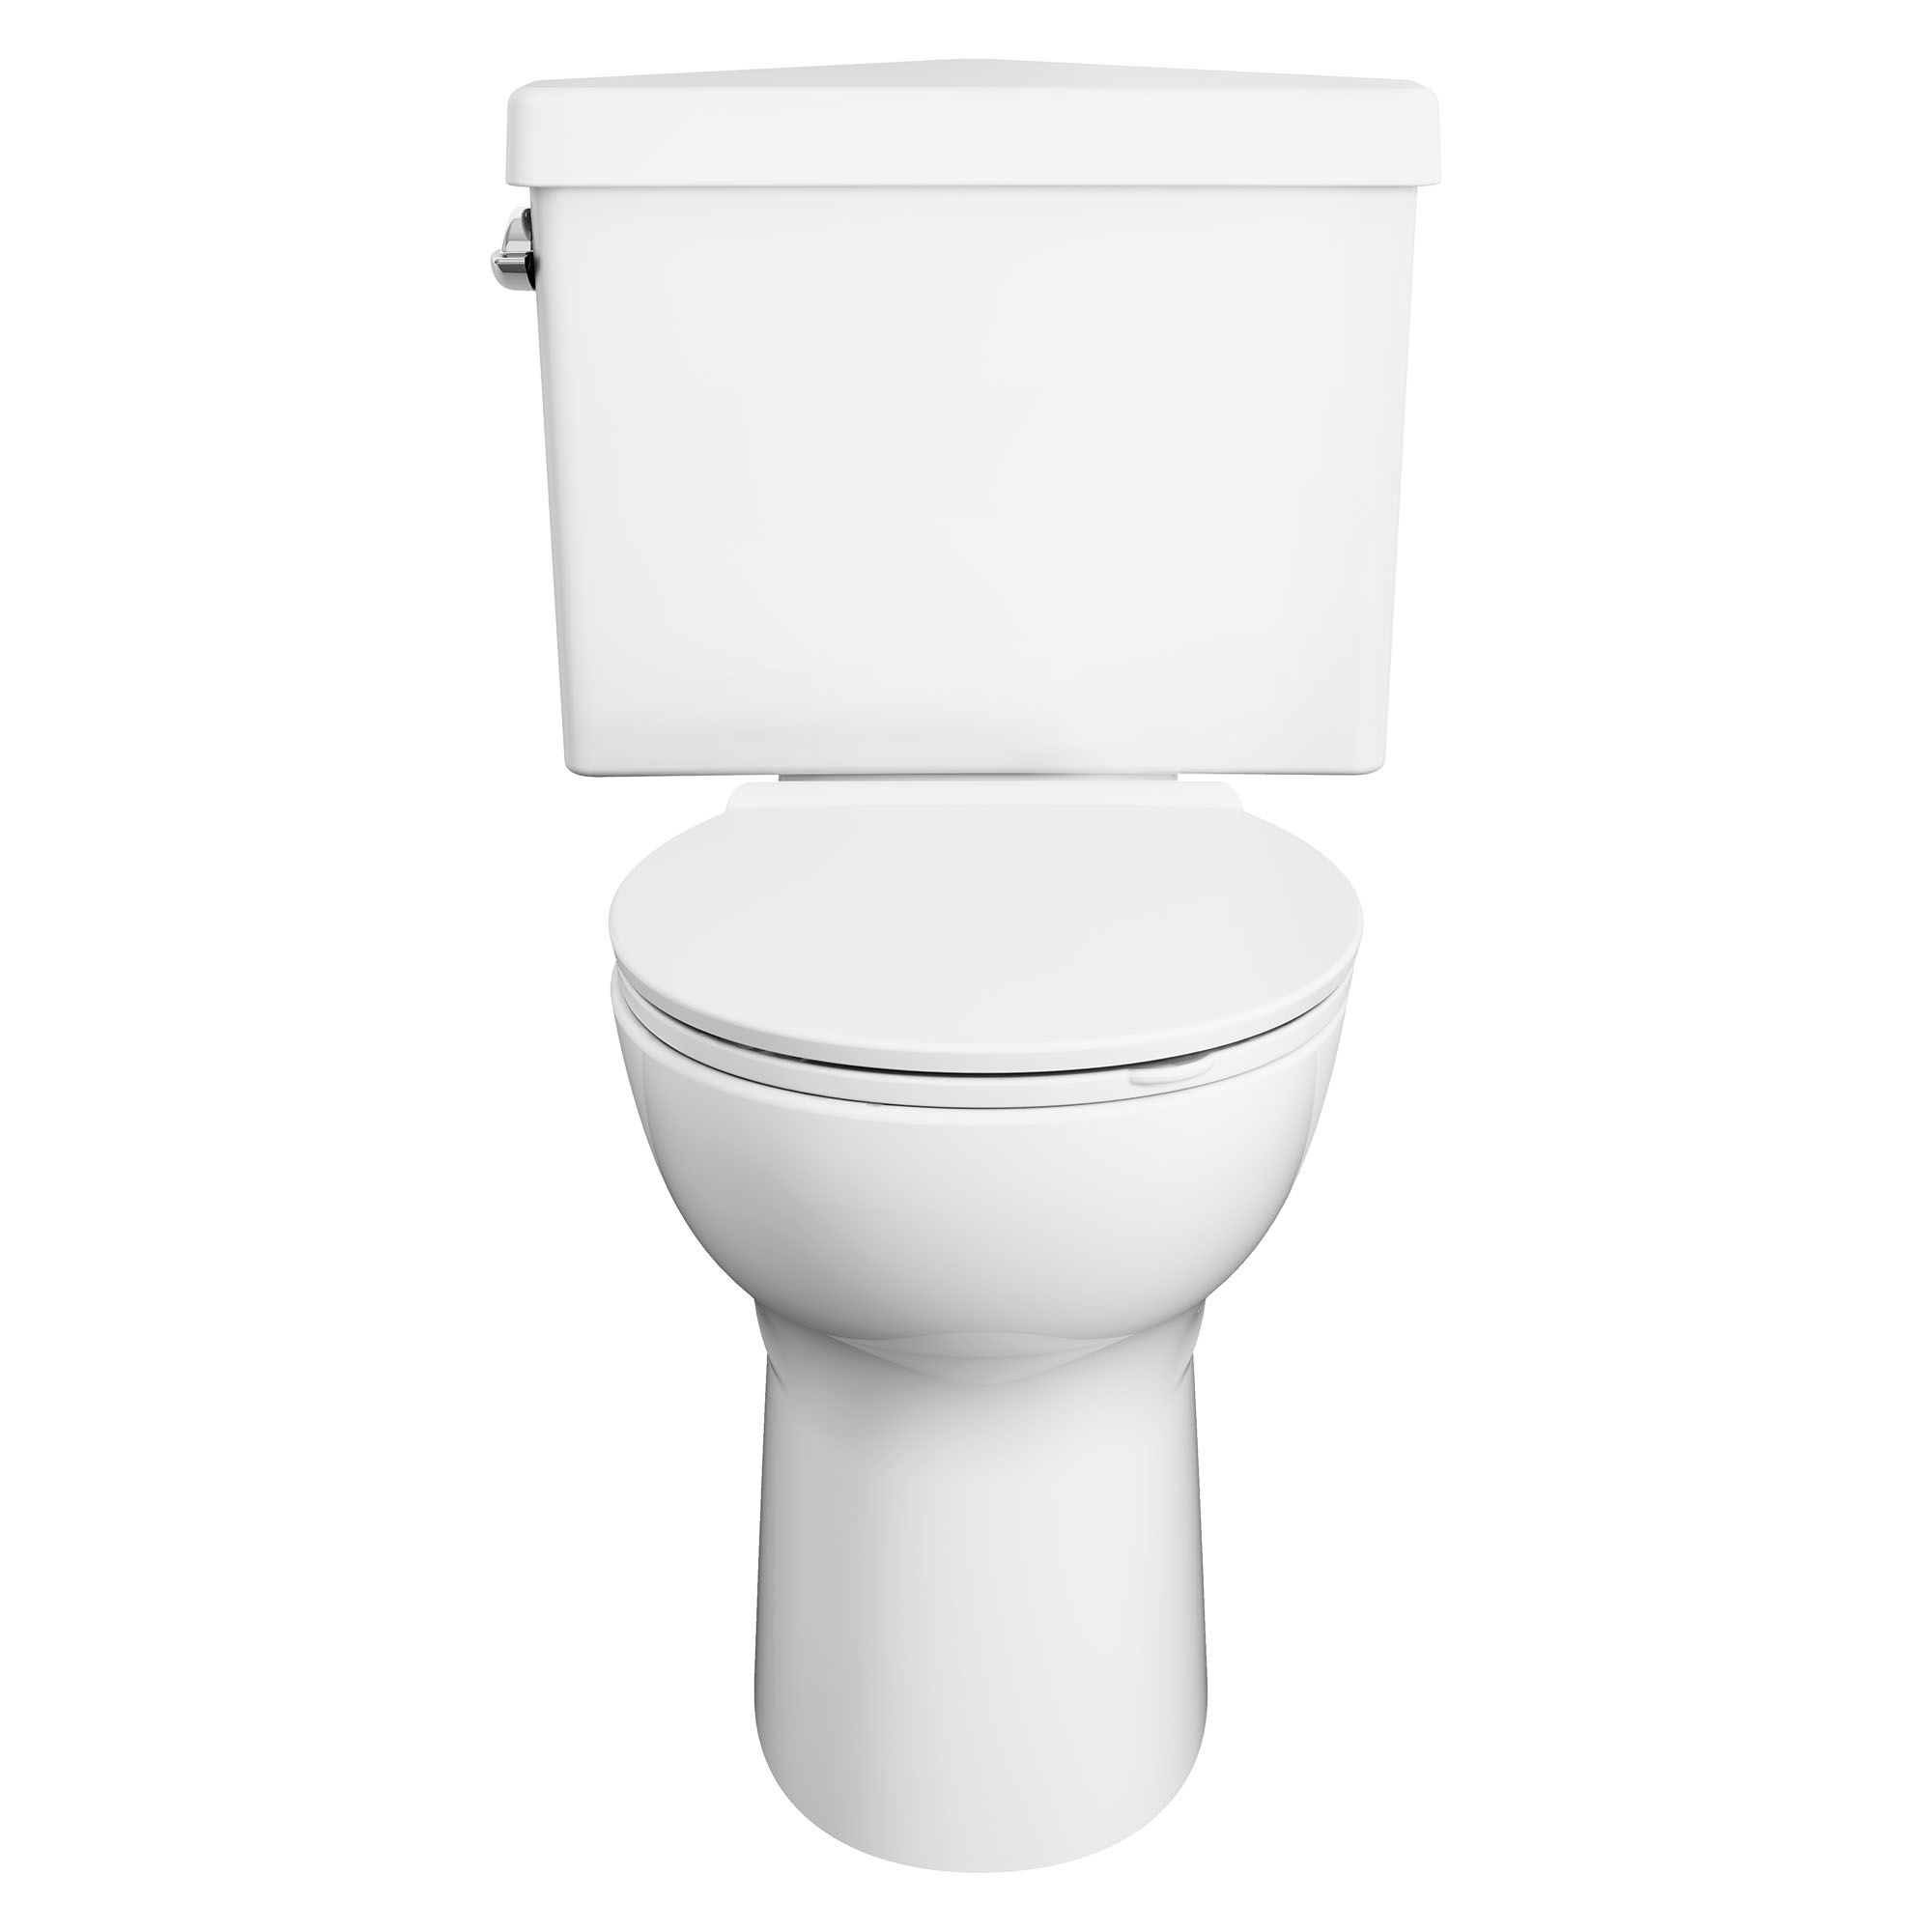 Triangle Cadet® PRO Two-Piece 1.28 gpf/4.8 Lpf Chair Height Round Front Toilet